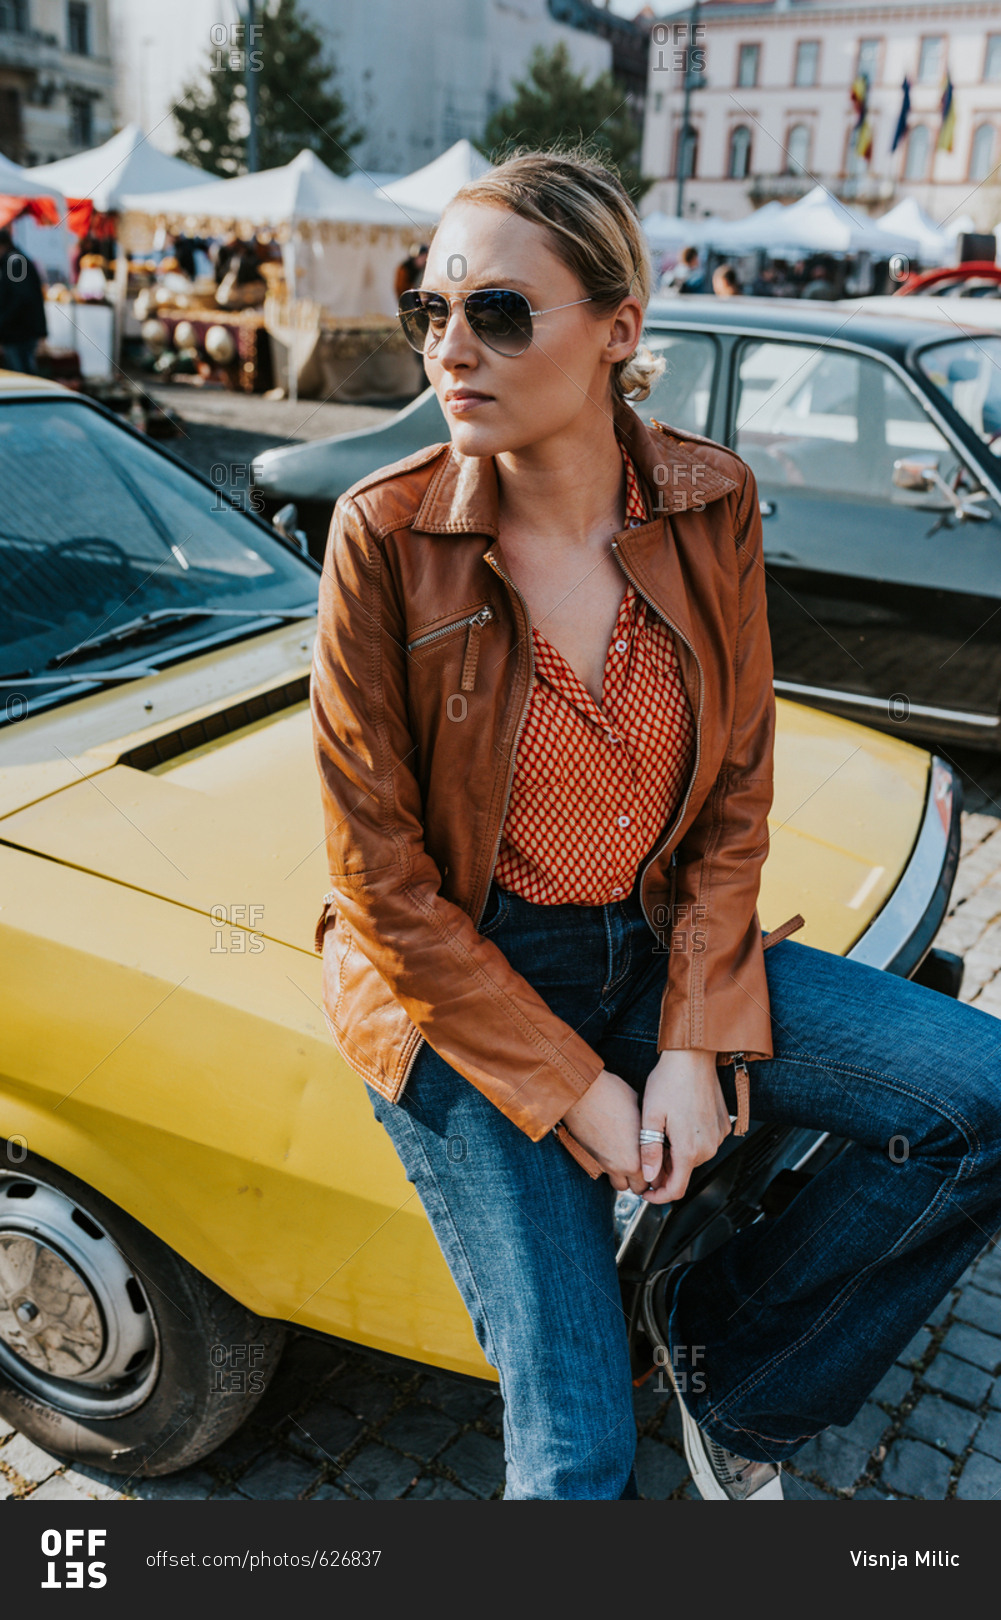 Blonde woman in late twenties sitting on yellow oldtimer car wearing retro seventies clothes style and aviator glasses